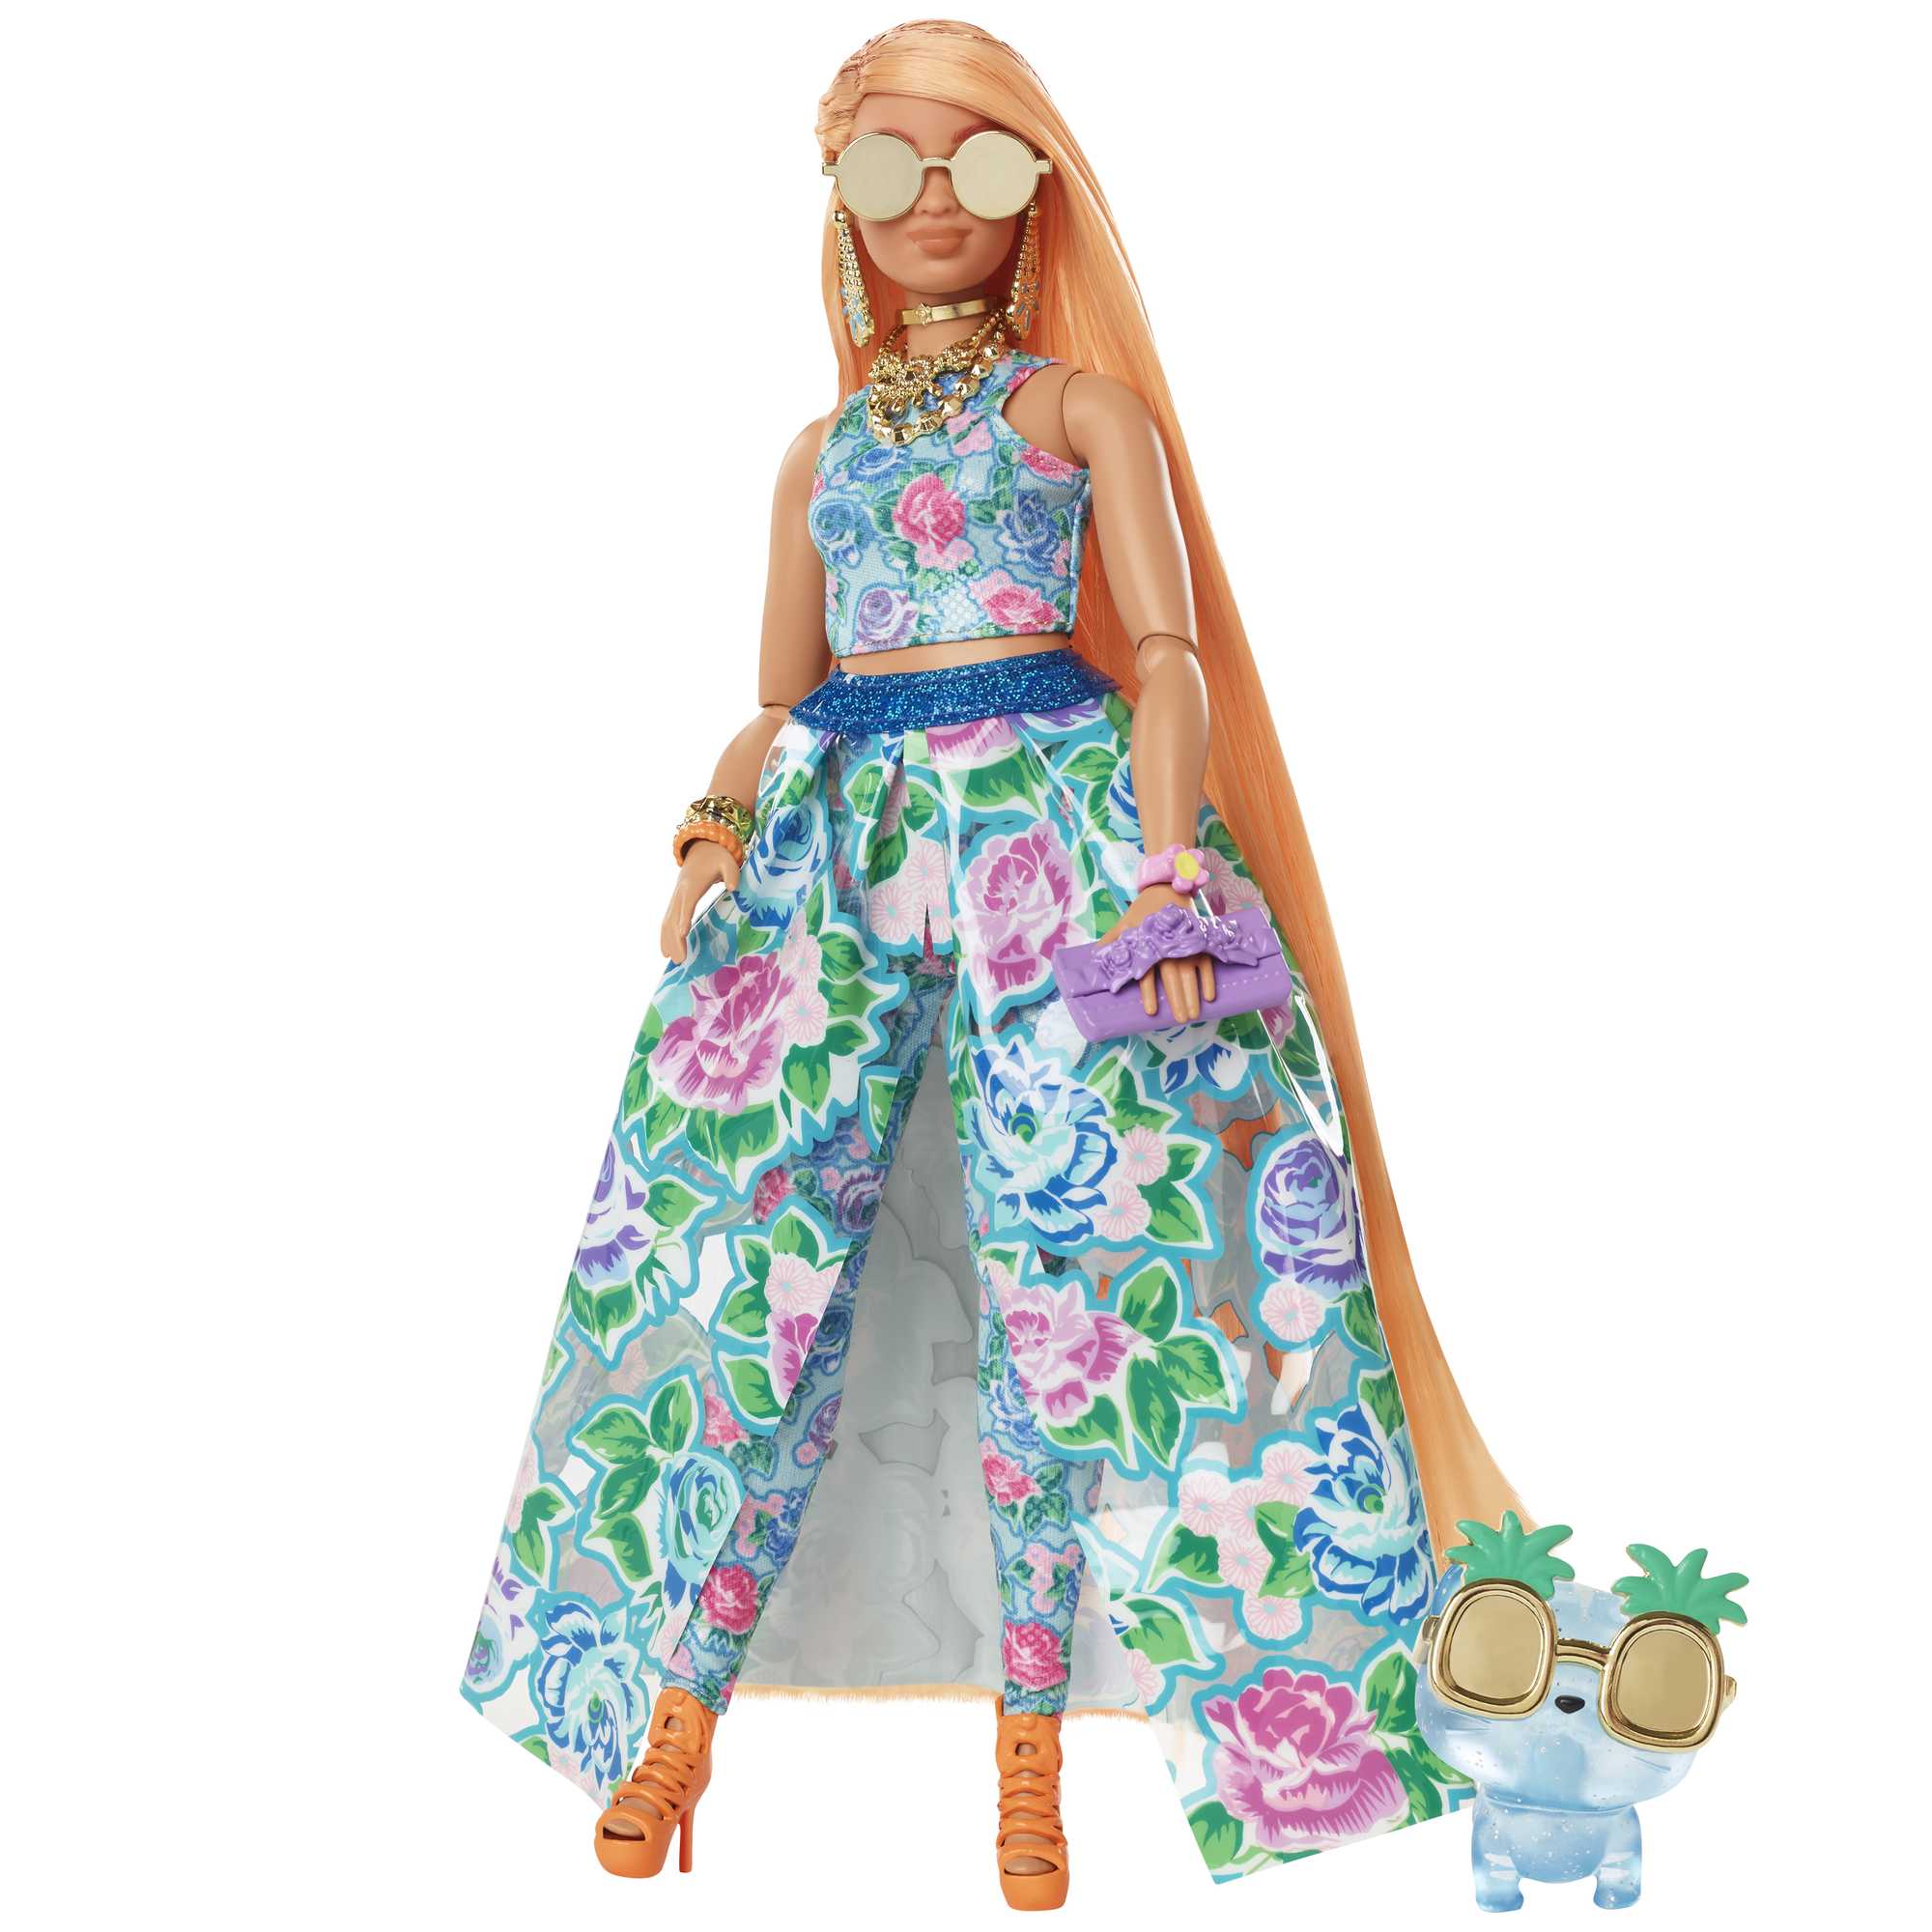 Barbie® Extra Fancy™ Doll and Accessories | Mattel